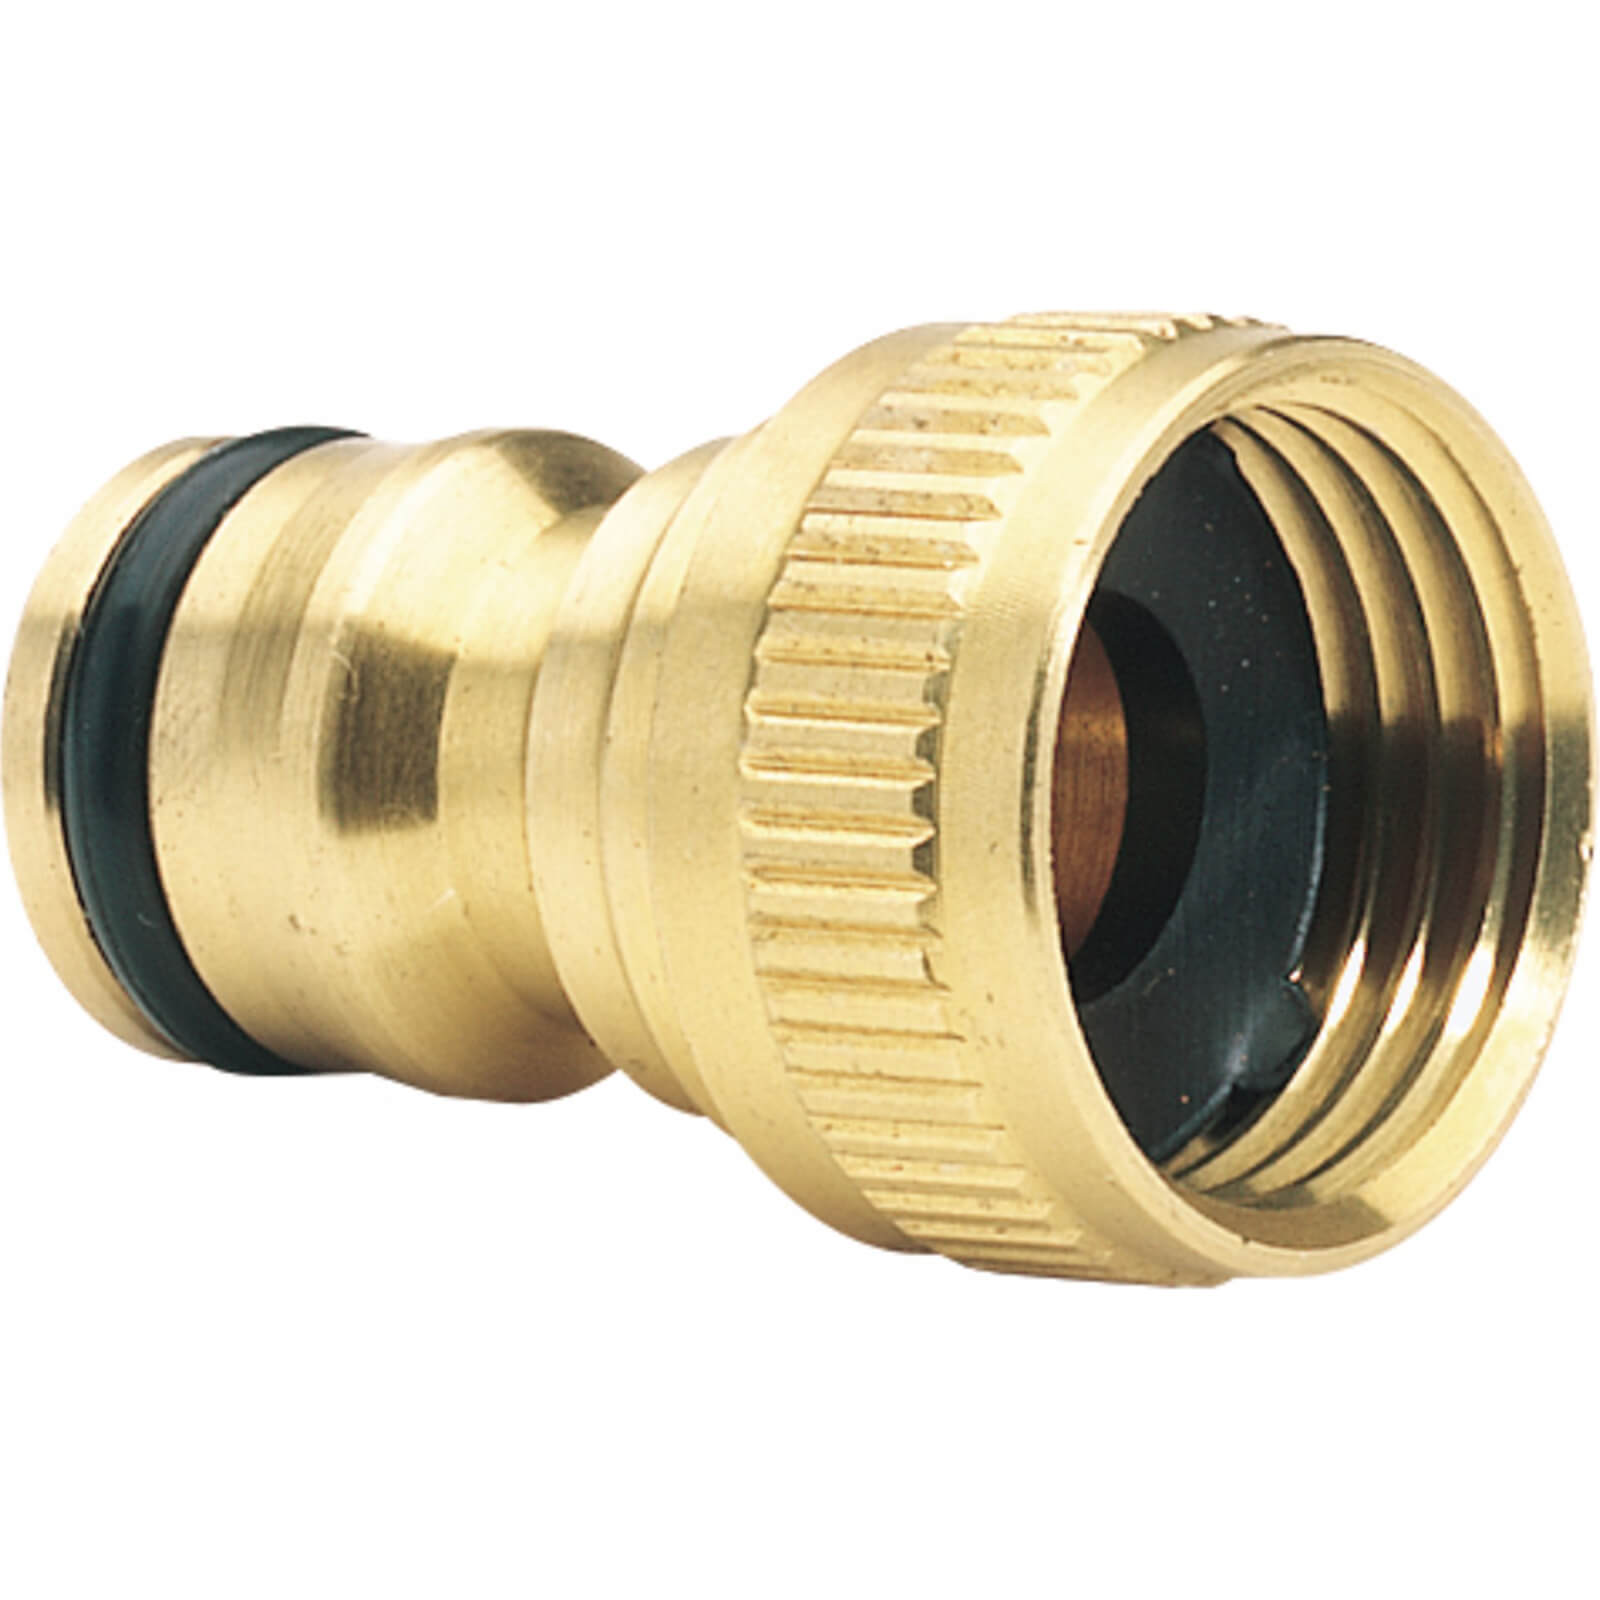 Photo of Draper Expert Brass Hose Pipe Tap Connector 1/2